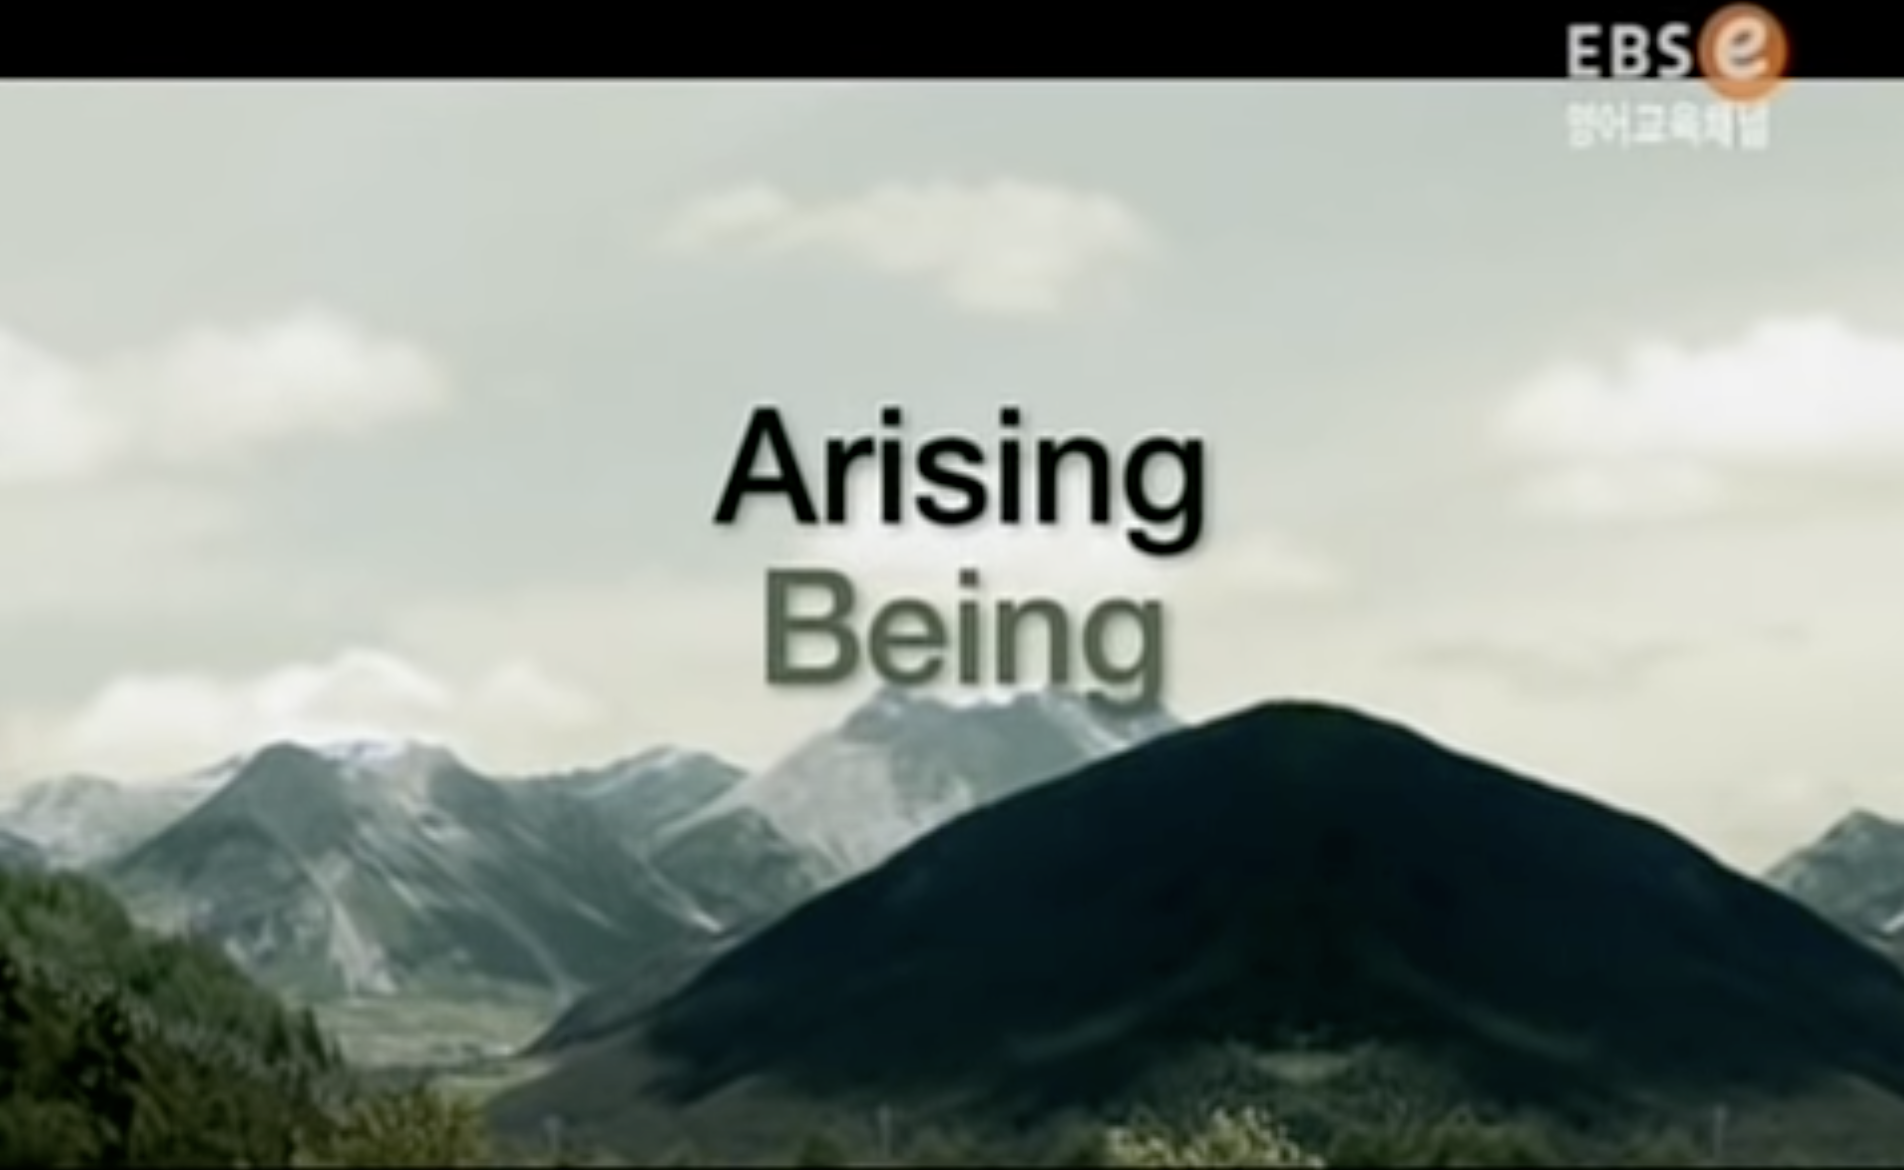 Words "Arising" and "Being" against a background of mountains